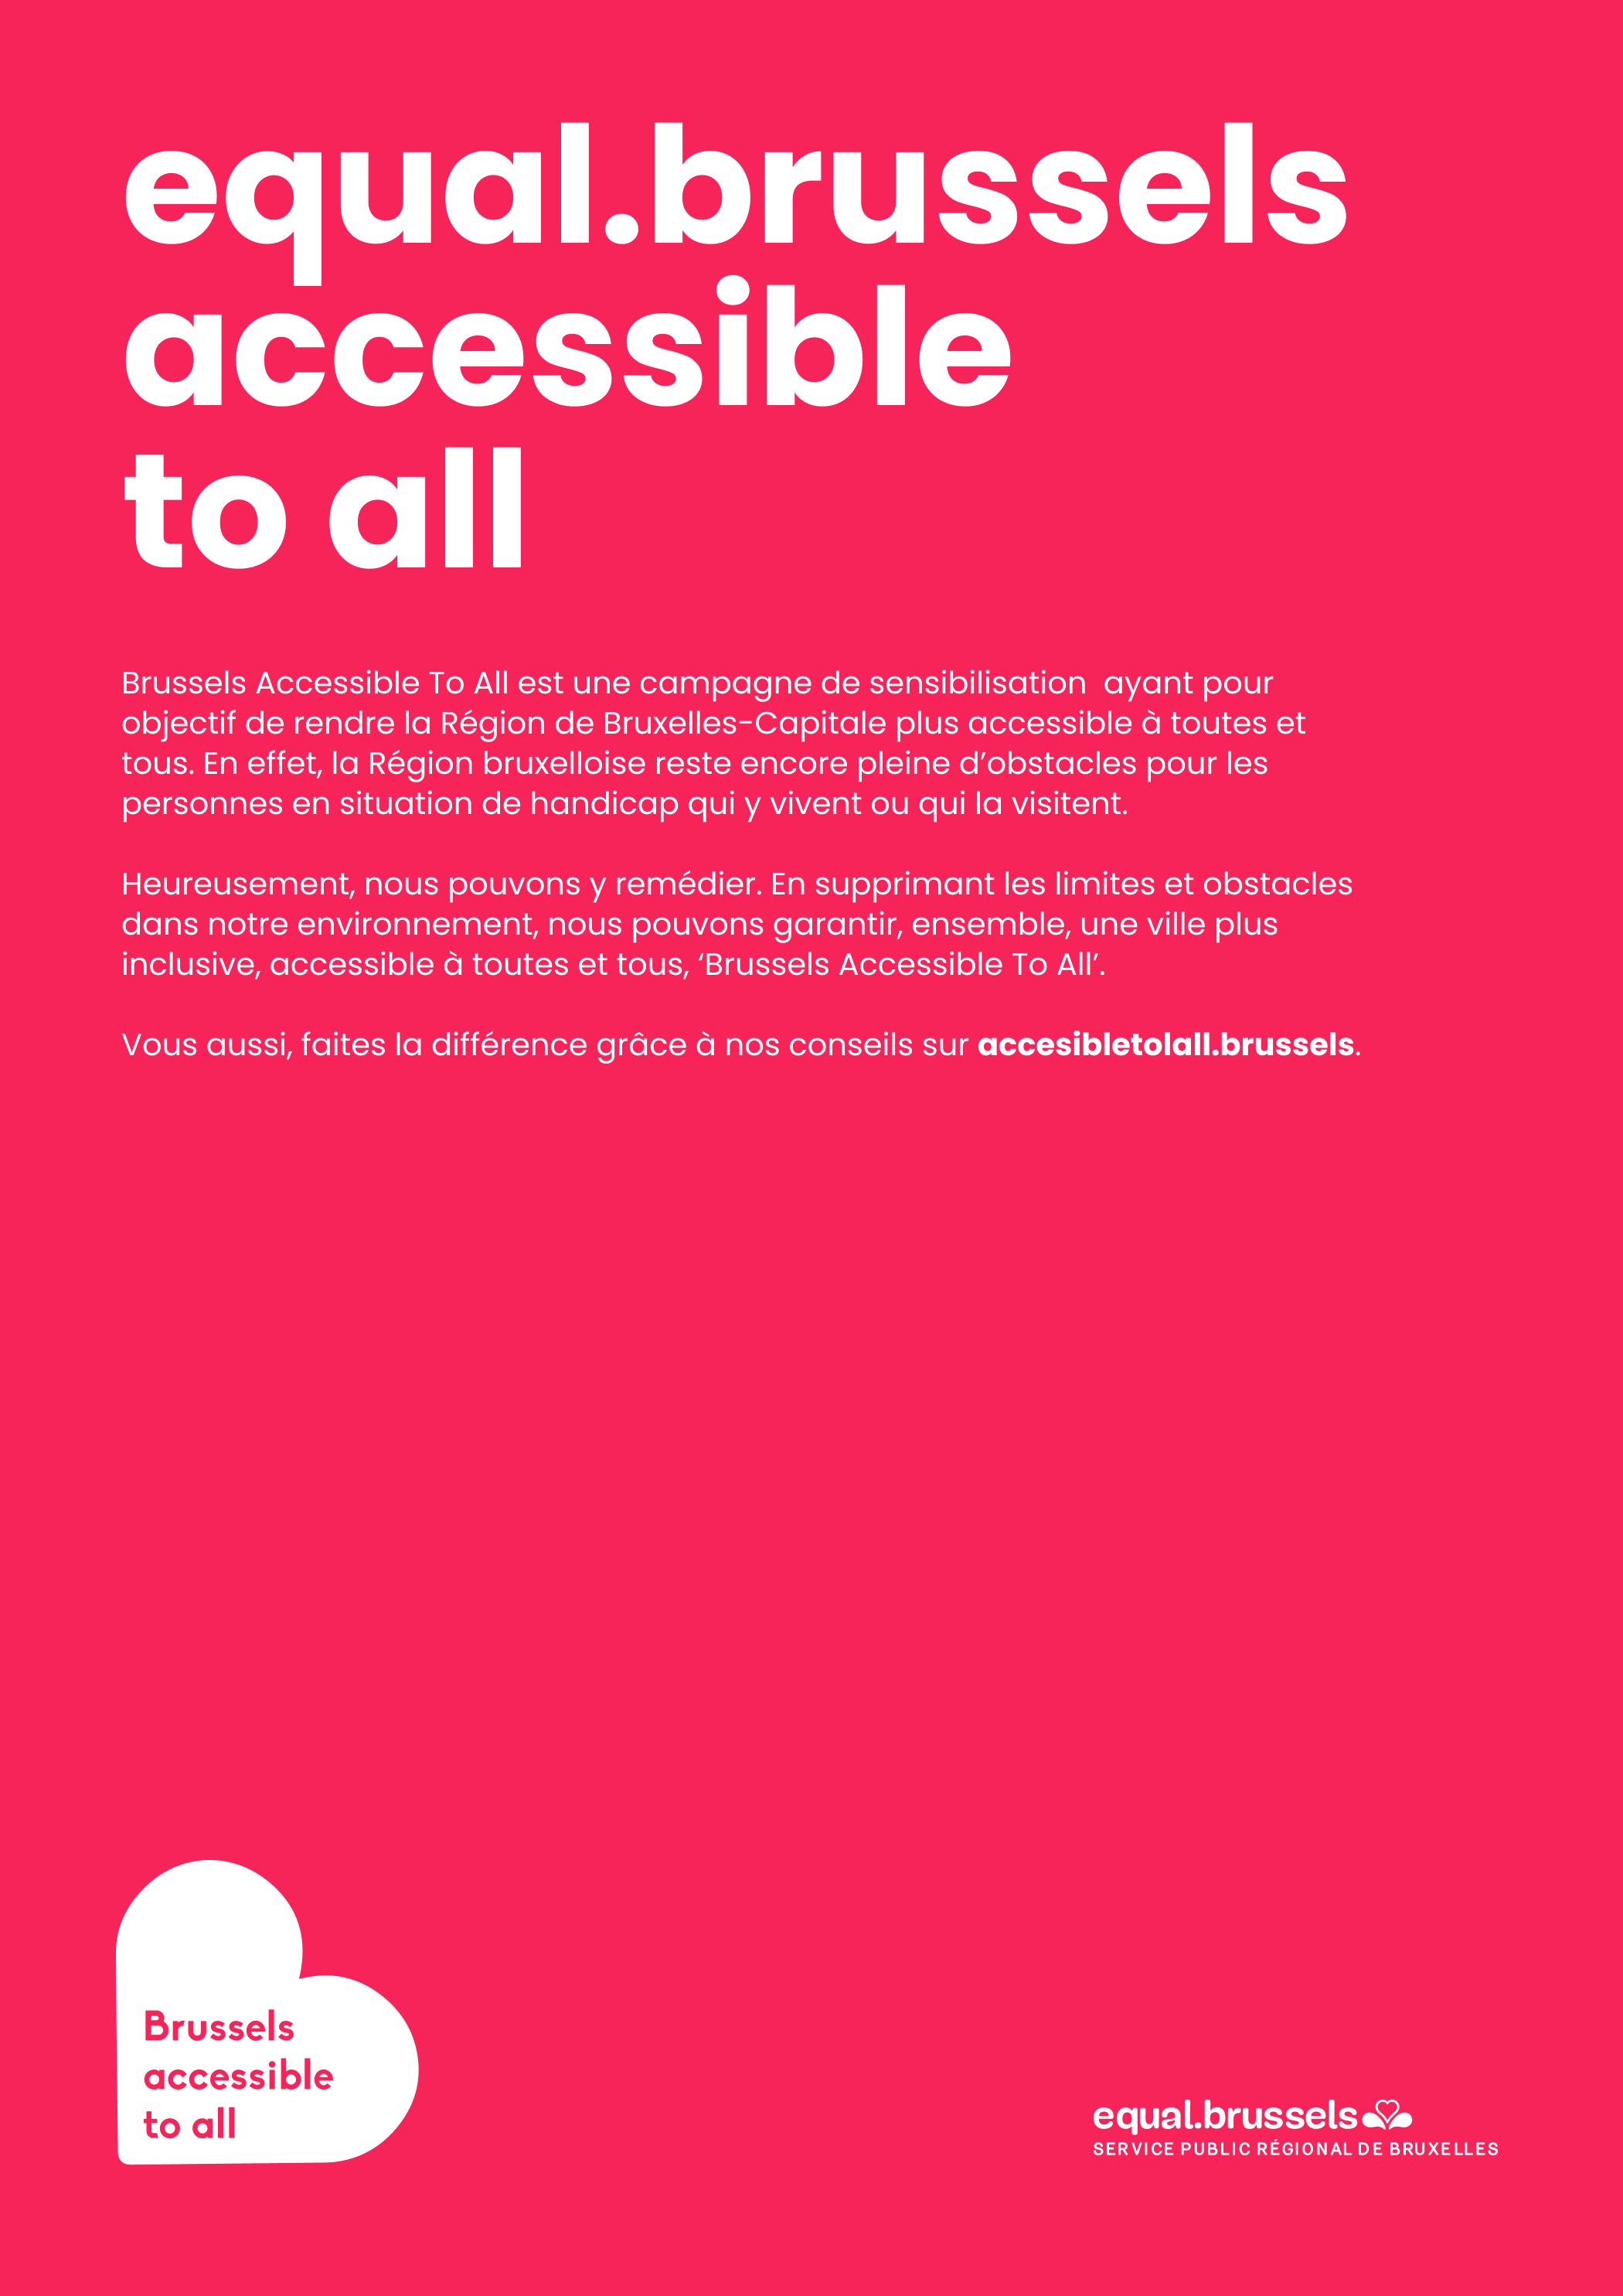 Brussels accesible to all poster